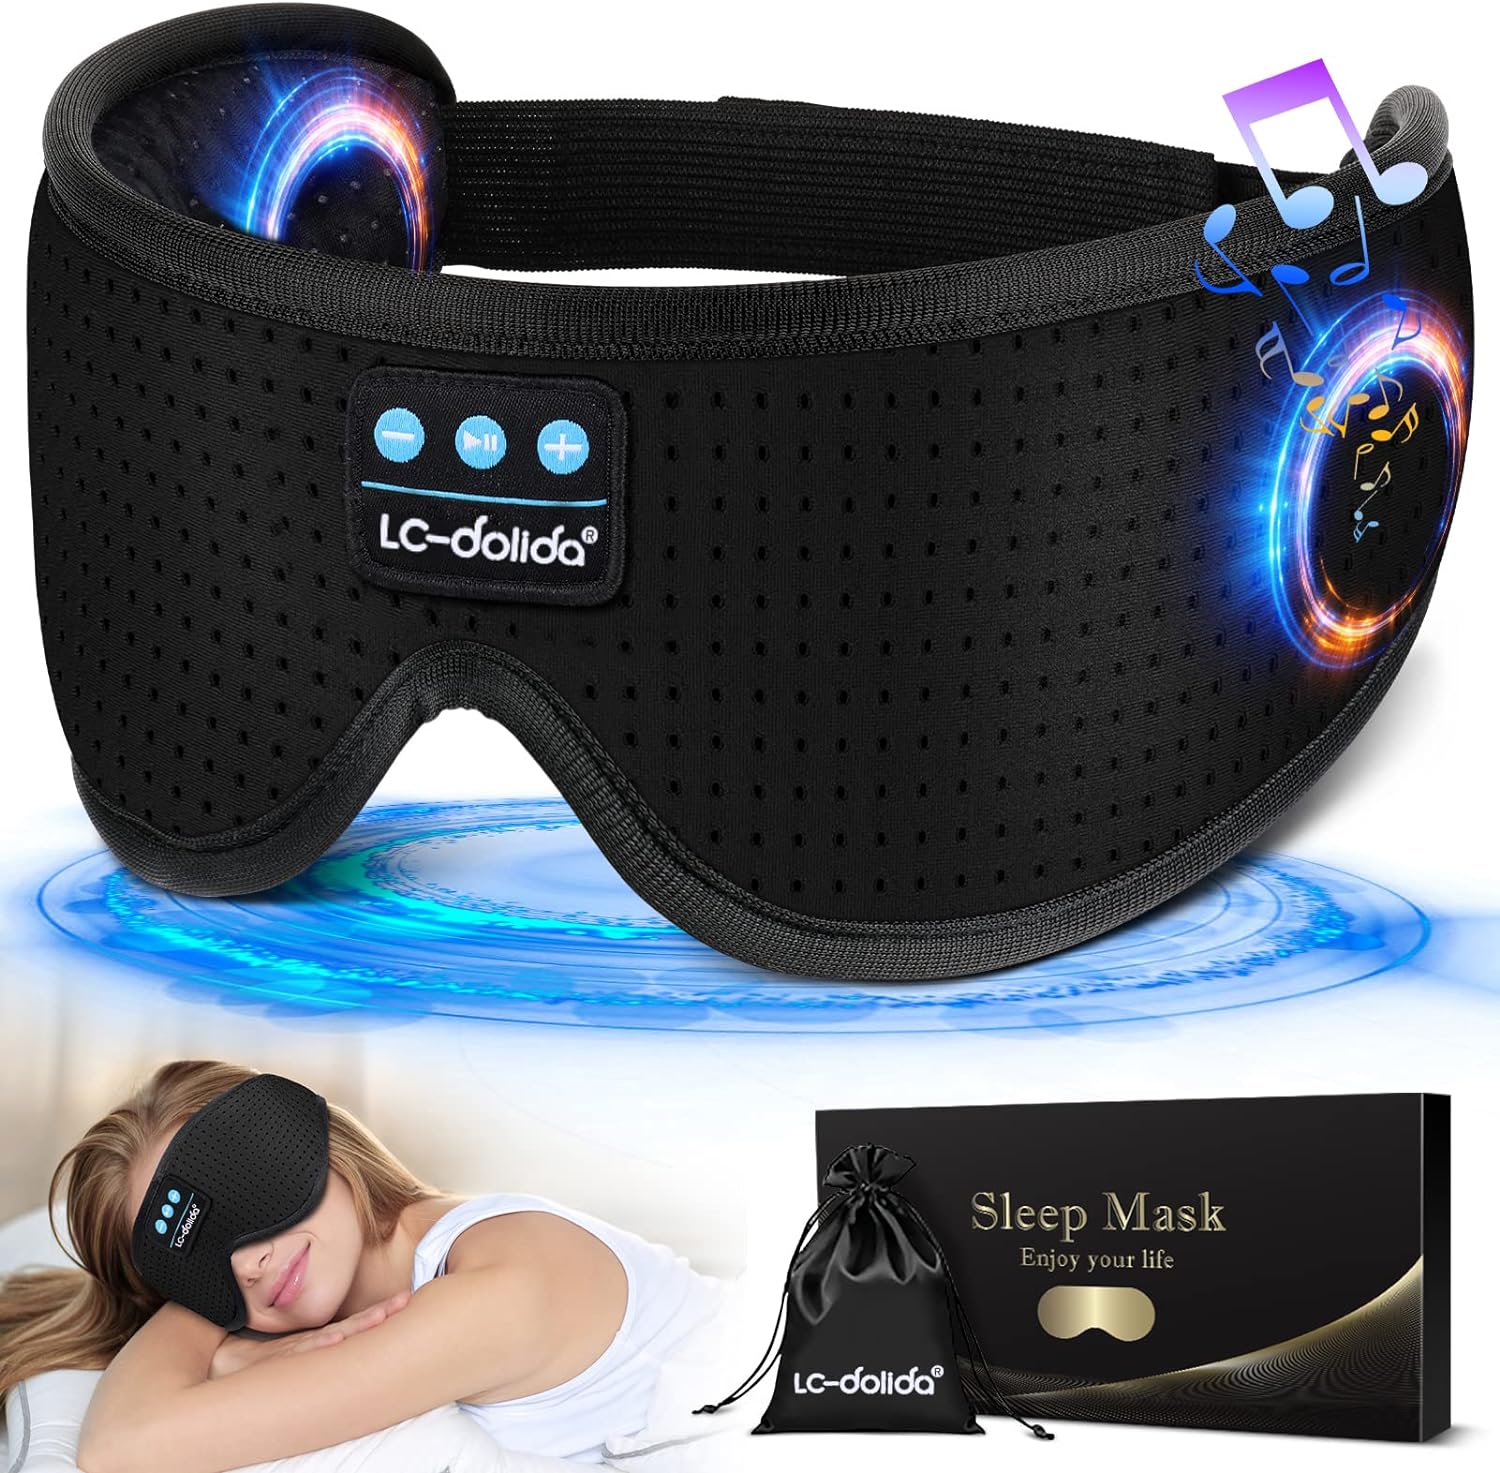 As someone who values a good night' sleep, I am excited to share my positive experience with the Sleep Listening to Soothing White Noise sleep mask with Bluetooth headphones. This product has been a game-changer for my sleep routine, providing unparalleled comfort and a tranquil atmosphere that has transformed my sleep quality. With its innovative features and exceptional performance, this sleep mask has become an indispensable part of my nightly routine.The first thing that struck me about thi